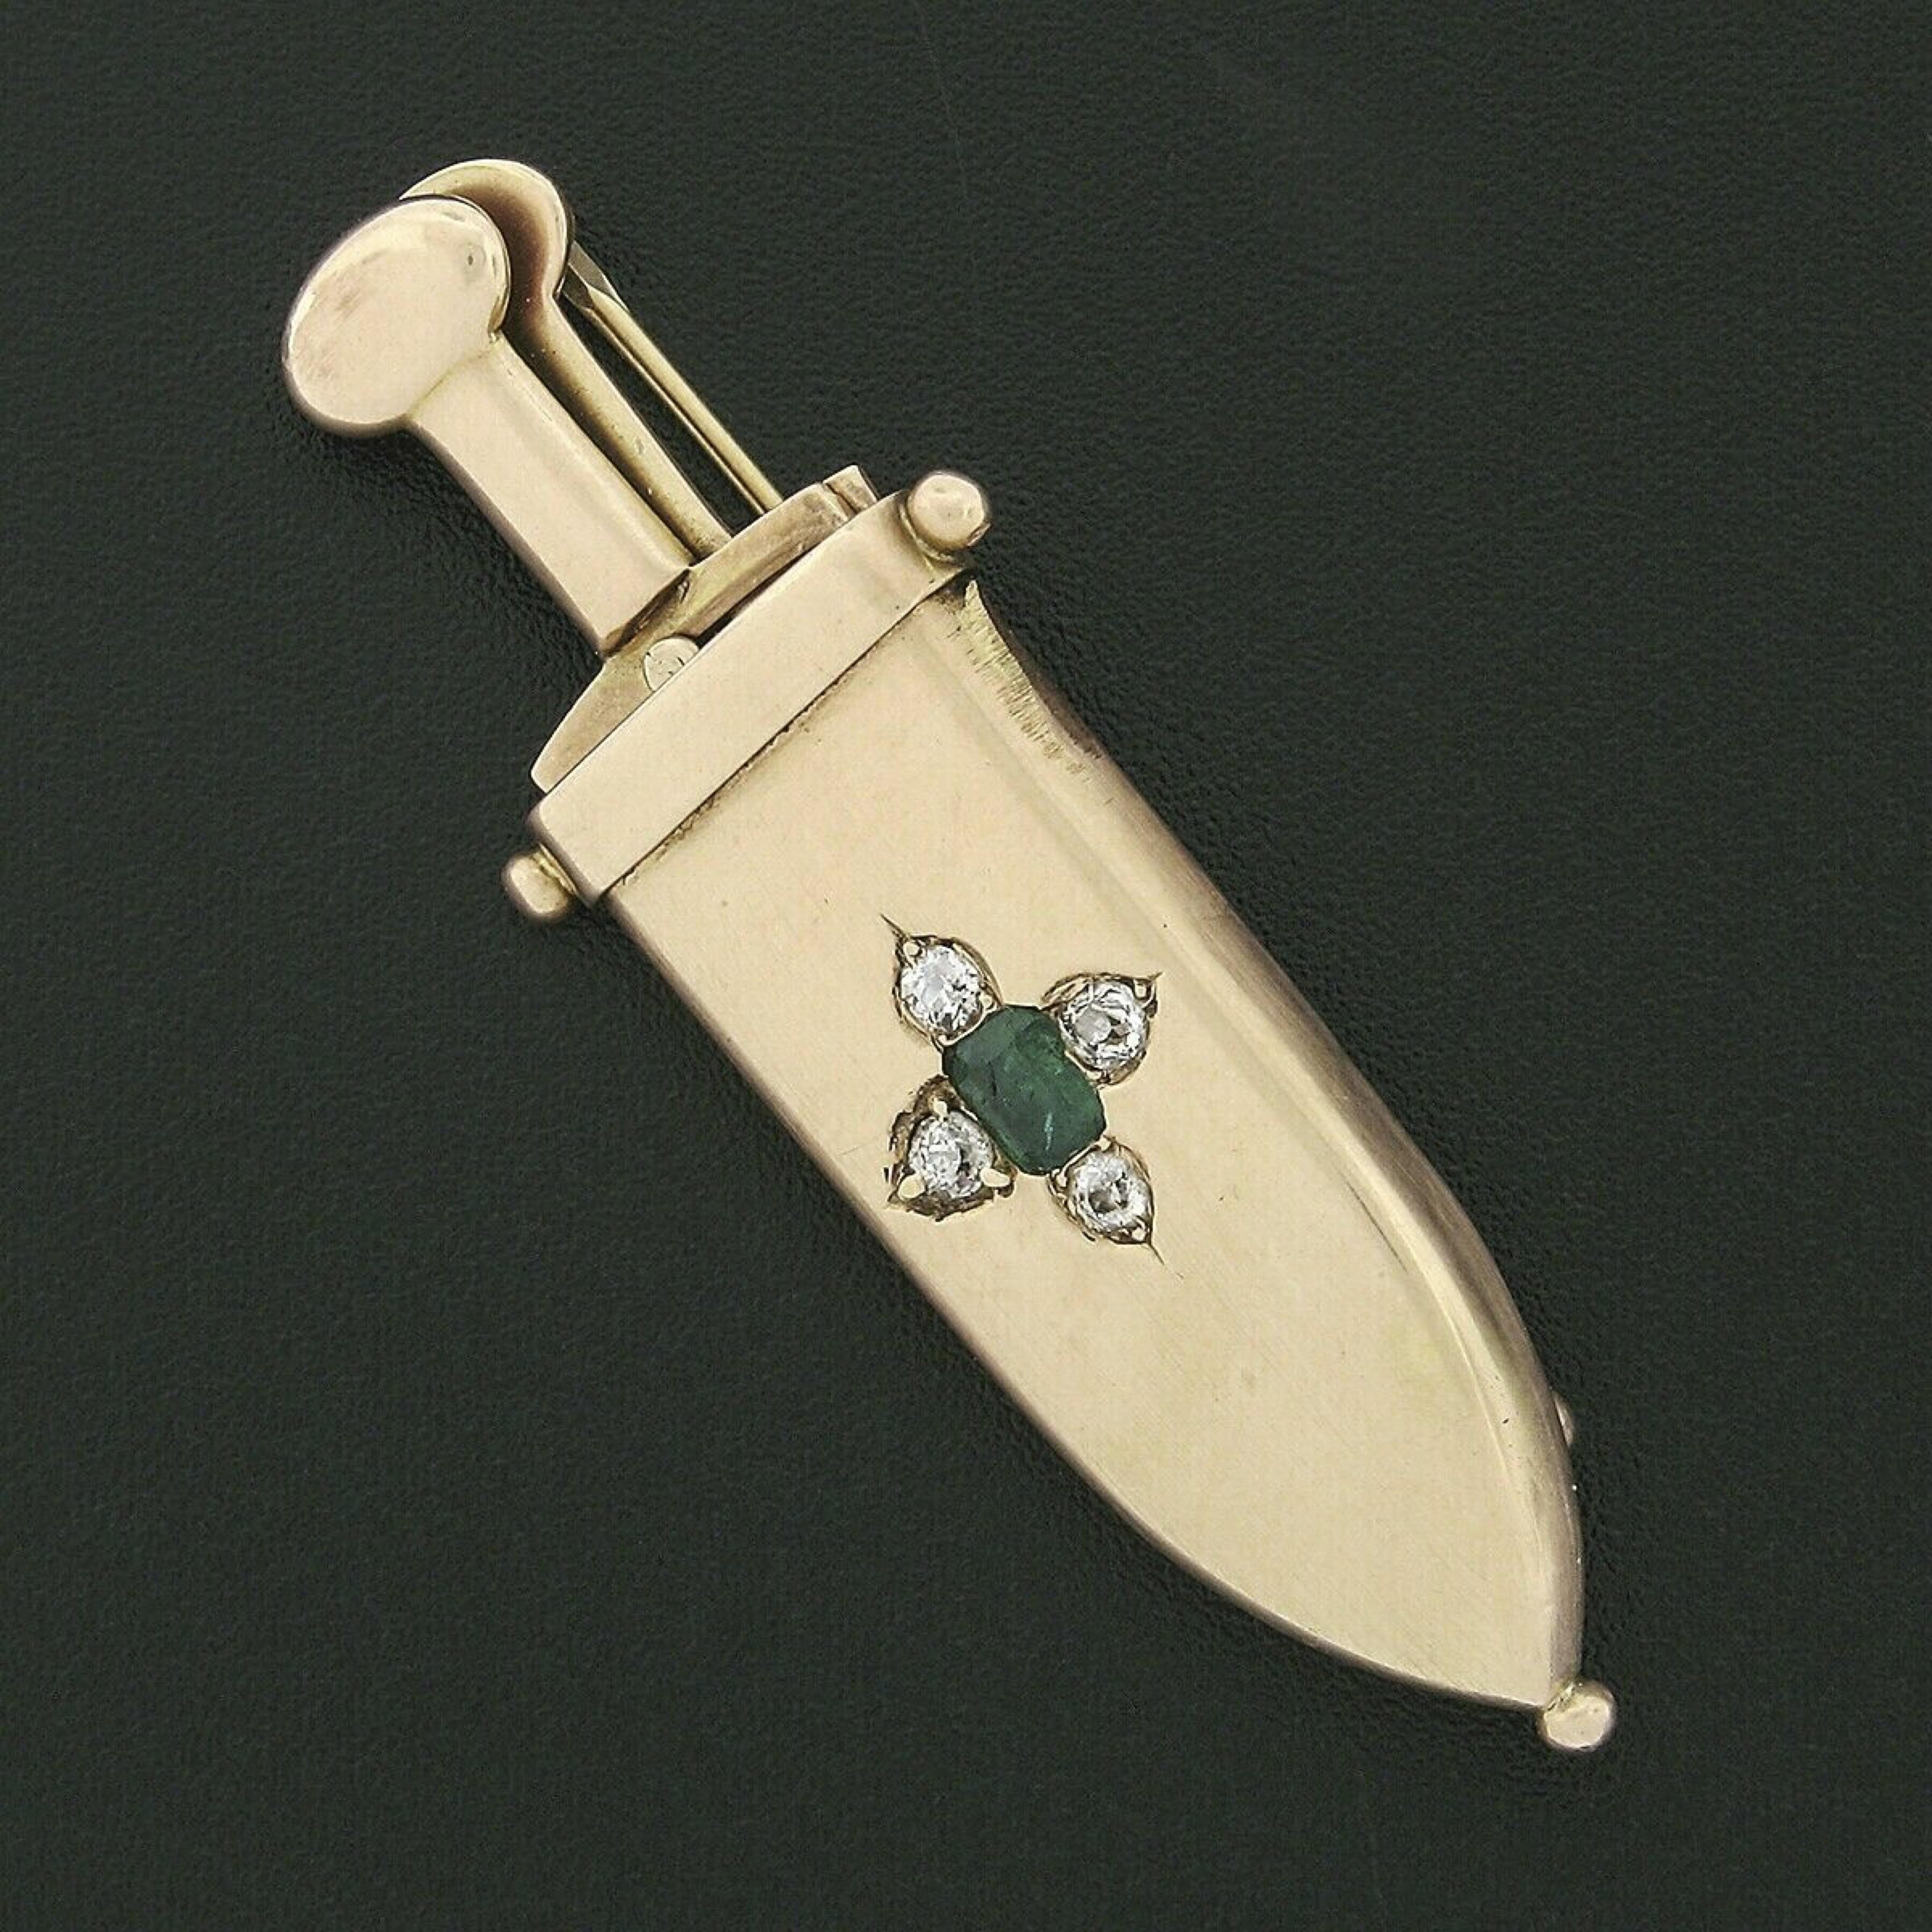 Here we have a gorgeous antique sword and sheath brooch crafted from solid 14k yellow gold with a rich rosy tone during the early Victorian era. This brooch features an emerald cut natural emerald weighing approximately 1/4 carat and displaying a